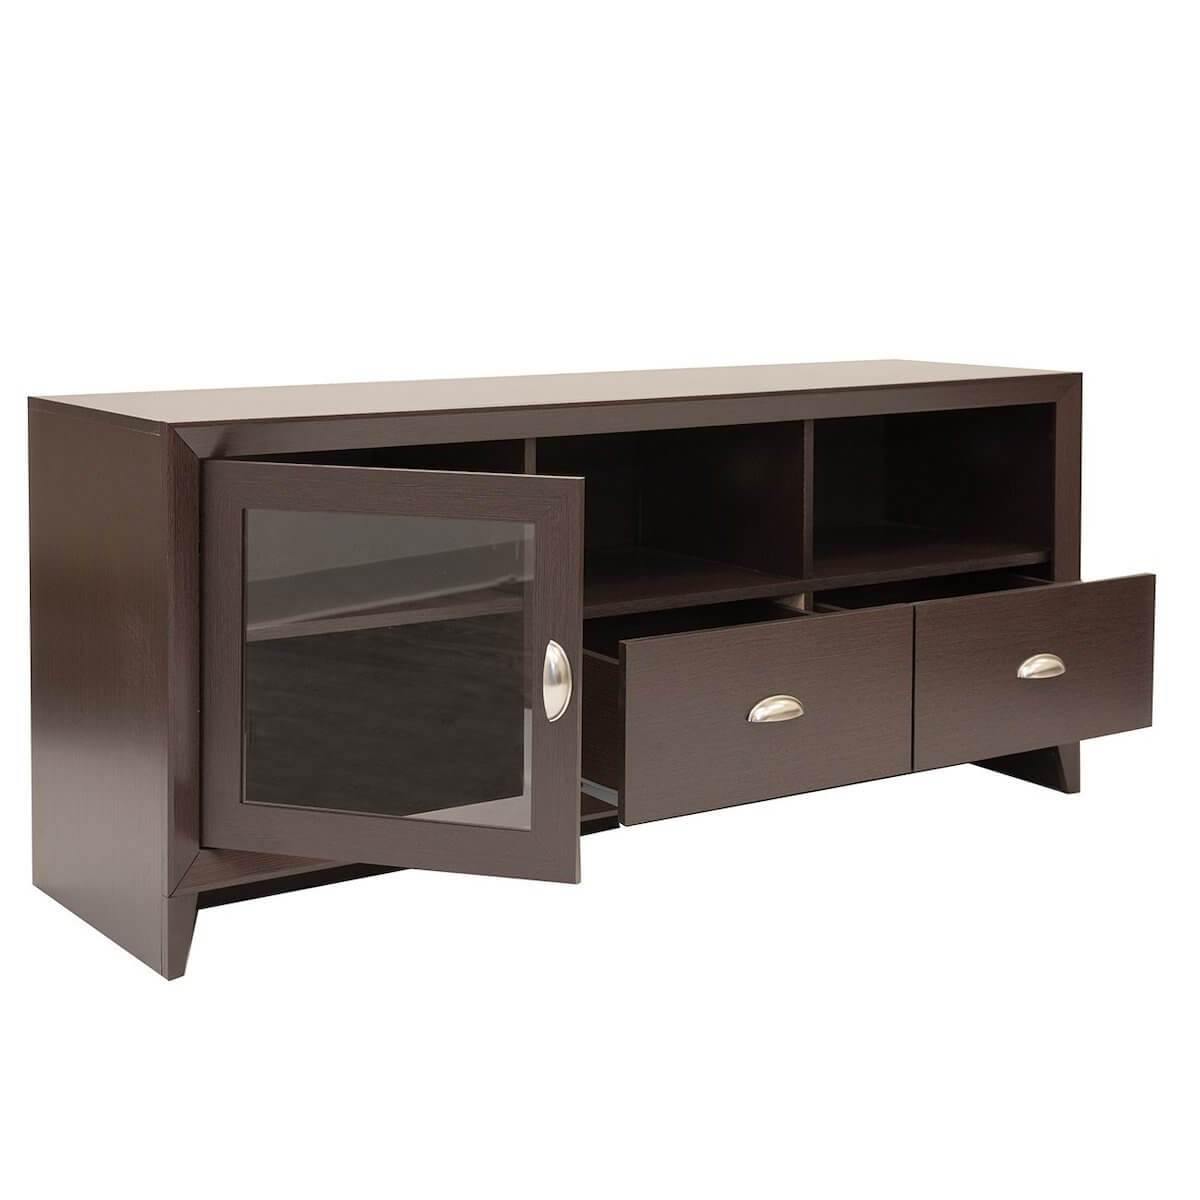 Techni Mobili Wenge Modern TV Stand with Storage for TVs Up To 60" RTA-8807-WN Open Cabinet and Drawers